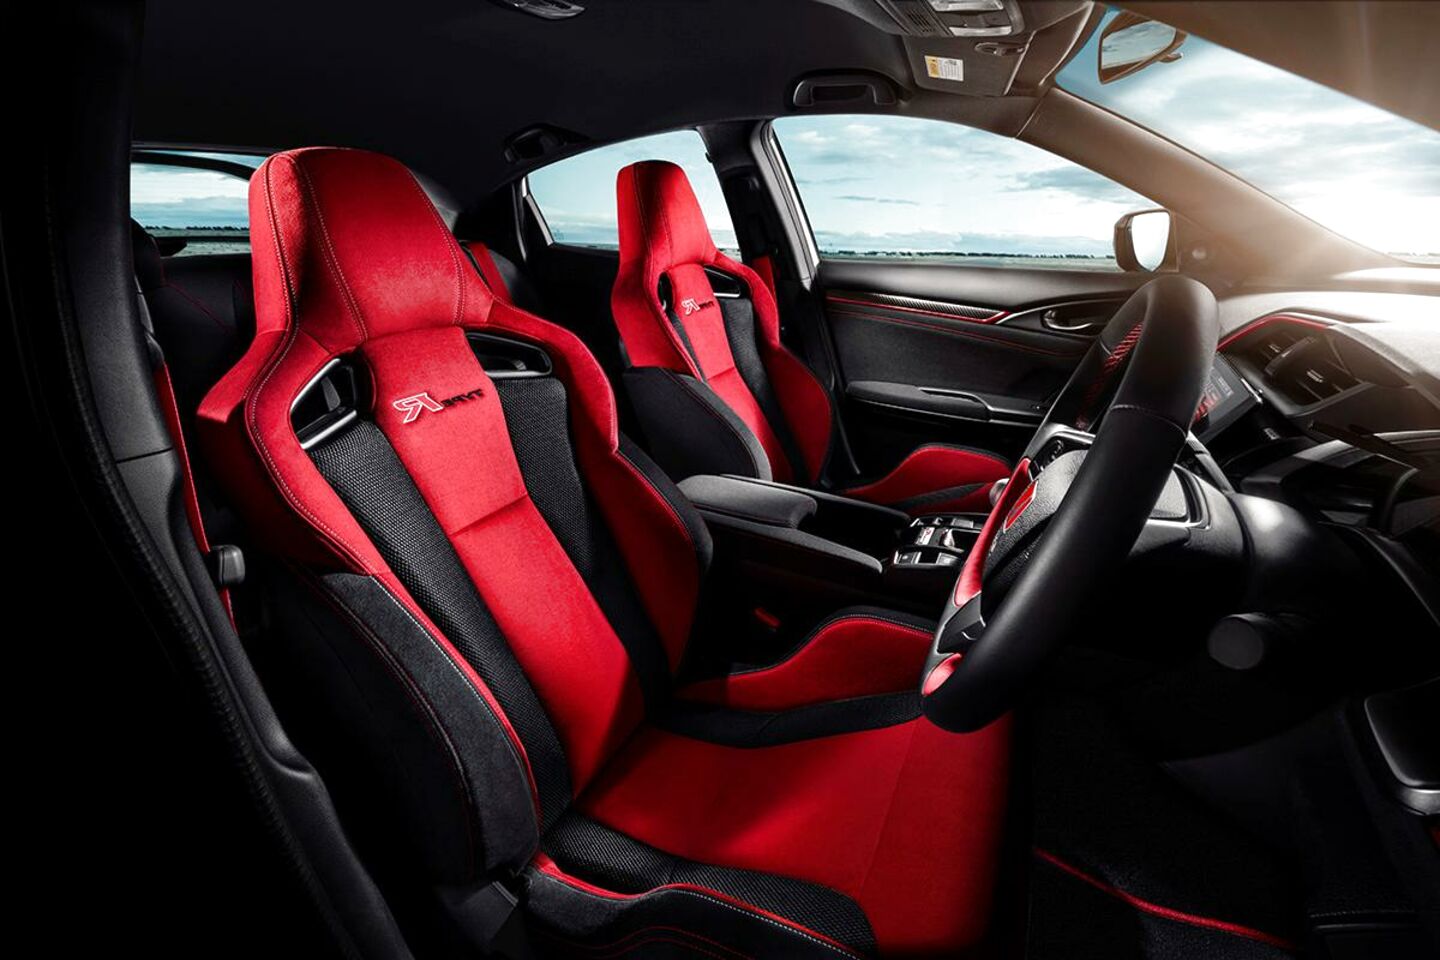 Honda Civic Type R Leather Seats For Sale In Uk